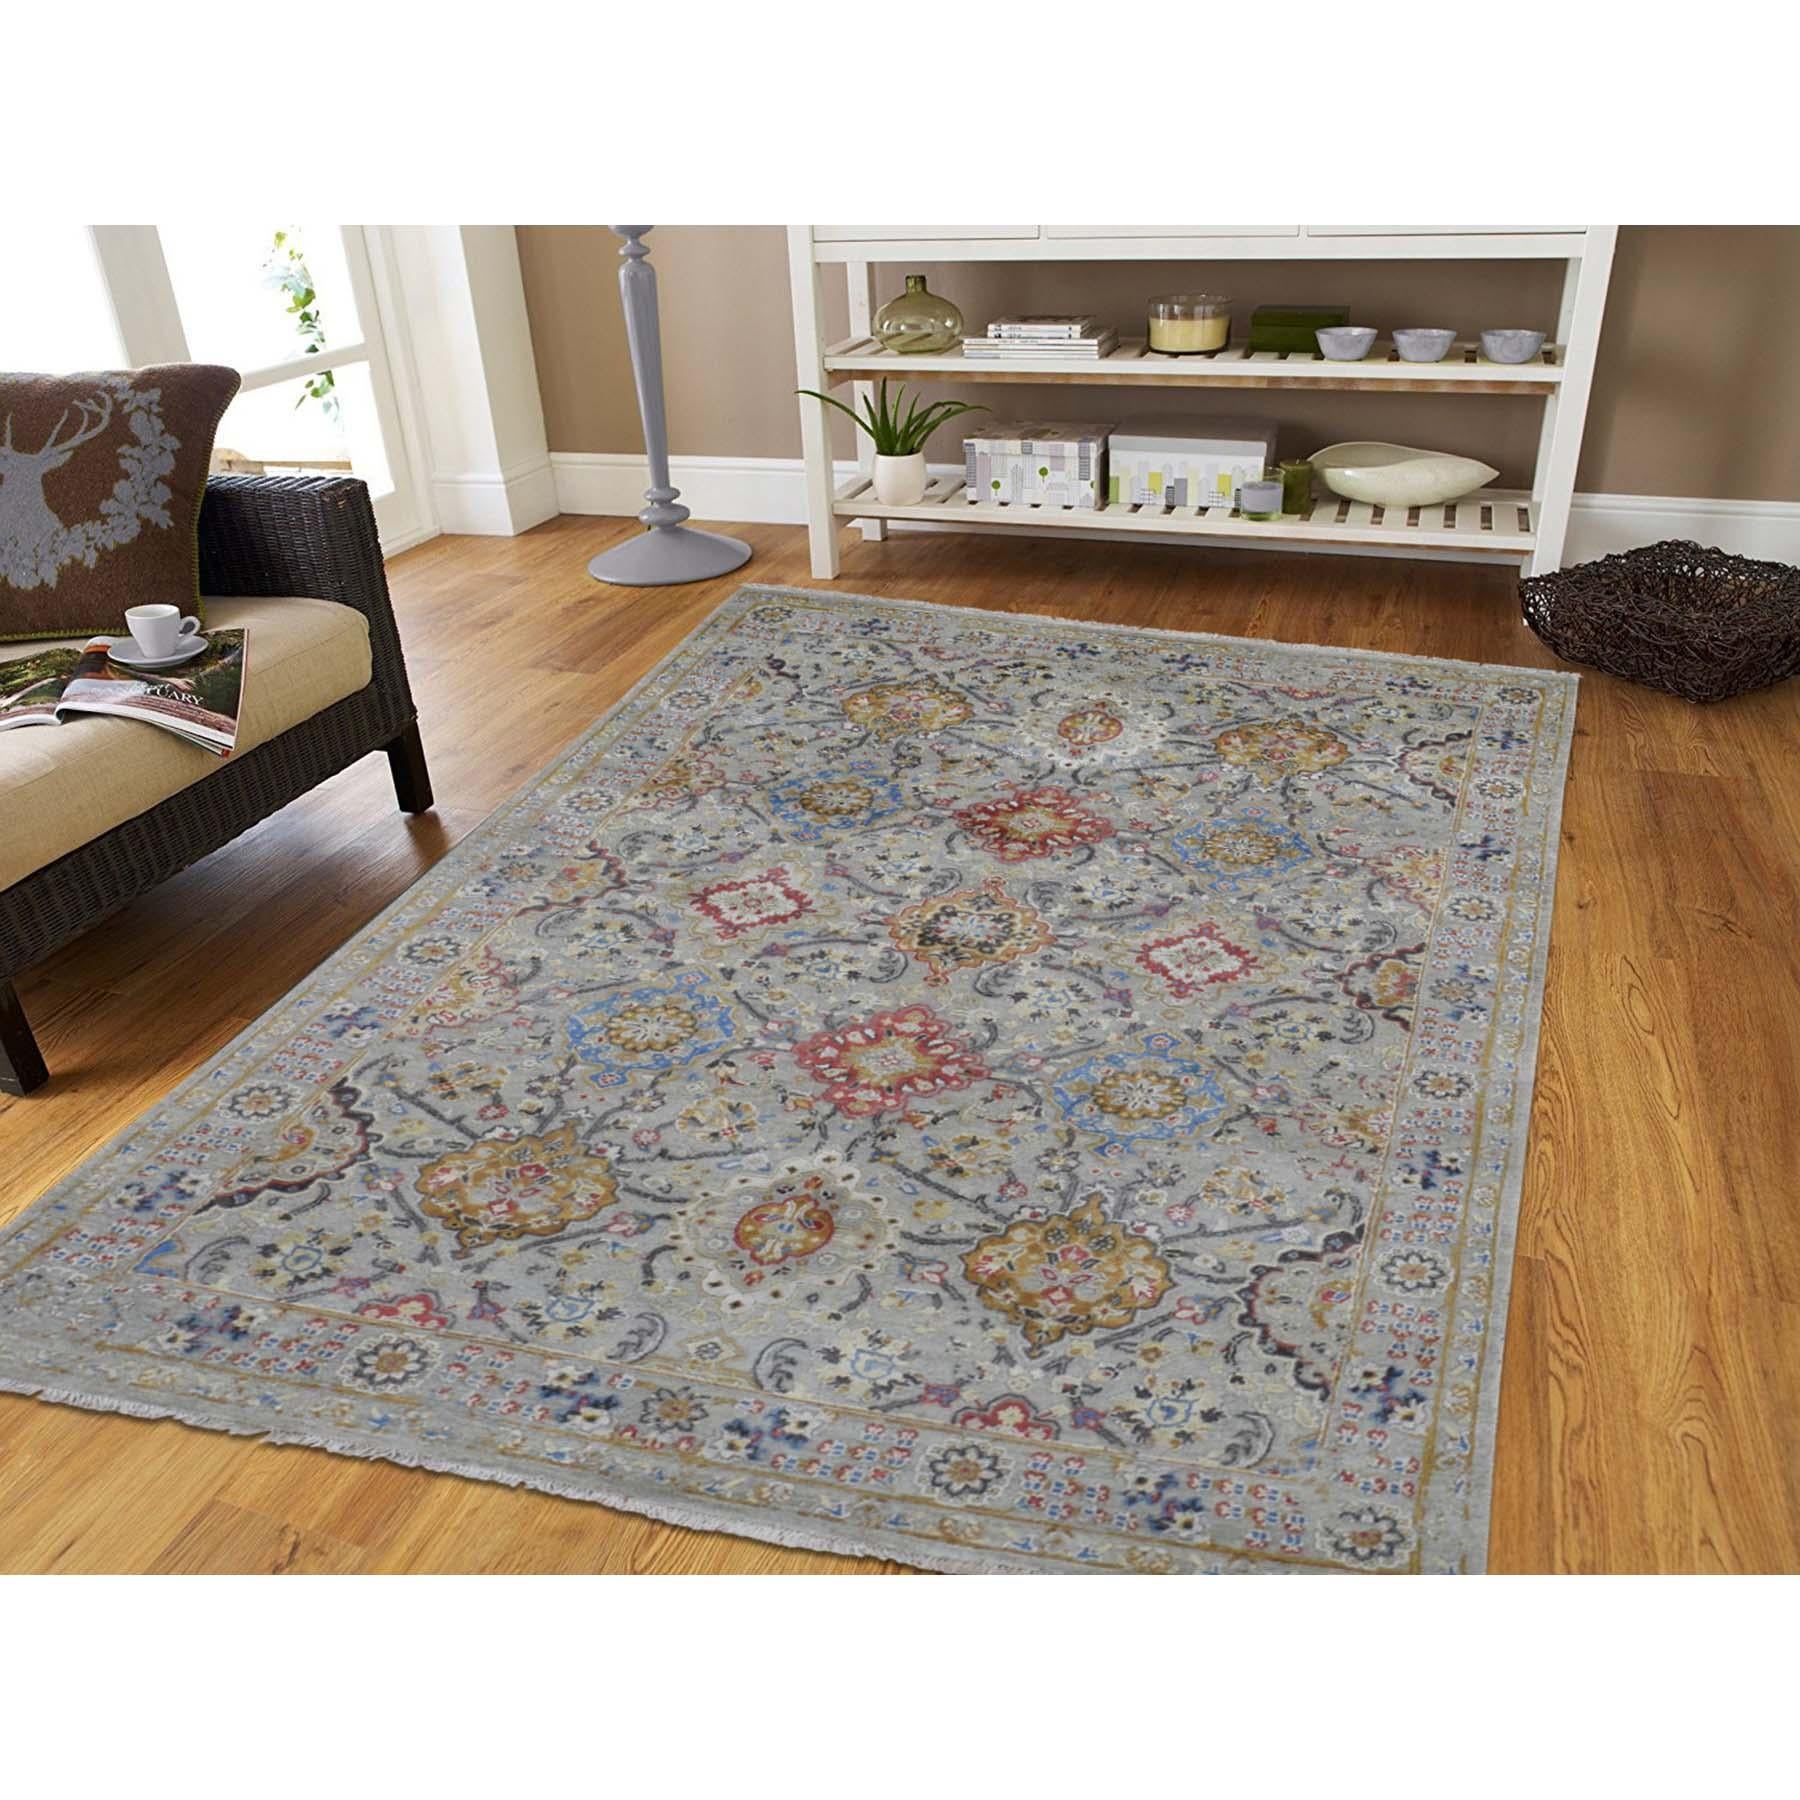 This is a truly genuine one-of-a-kind The Sunset Rosettes pure silk and wool hand knotted Oriental rug. It has been knotted for months and months in the centuries-old Persian weaving craftsmanship techniques by expert artisans. Measures: 5'0